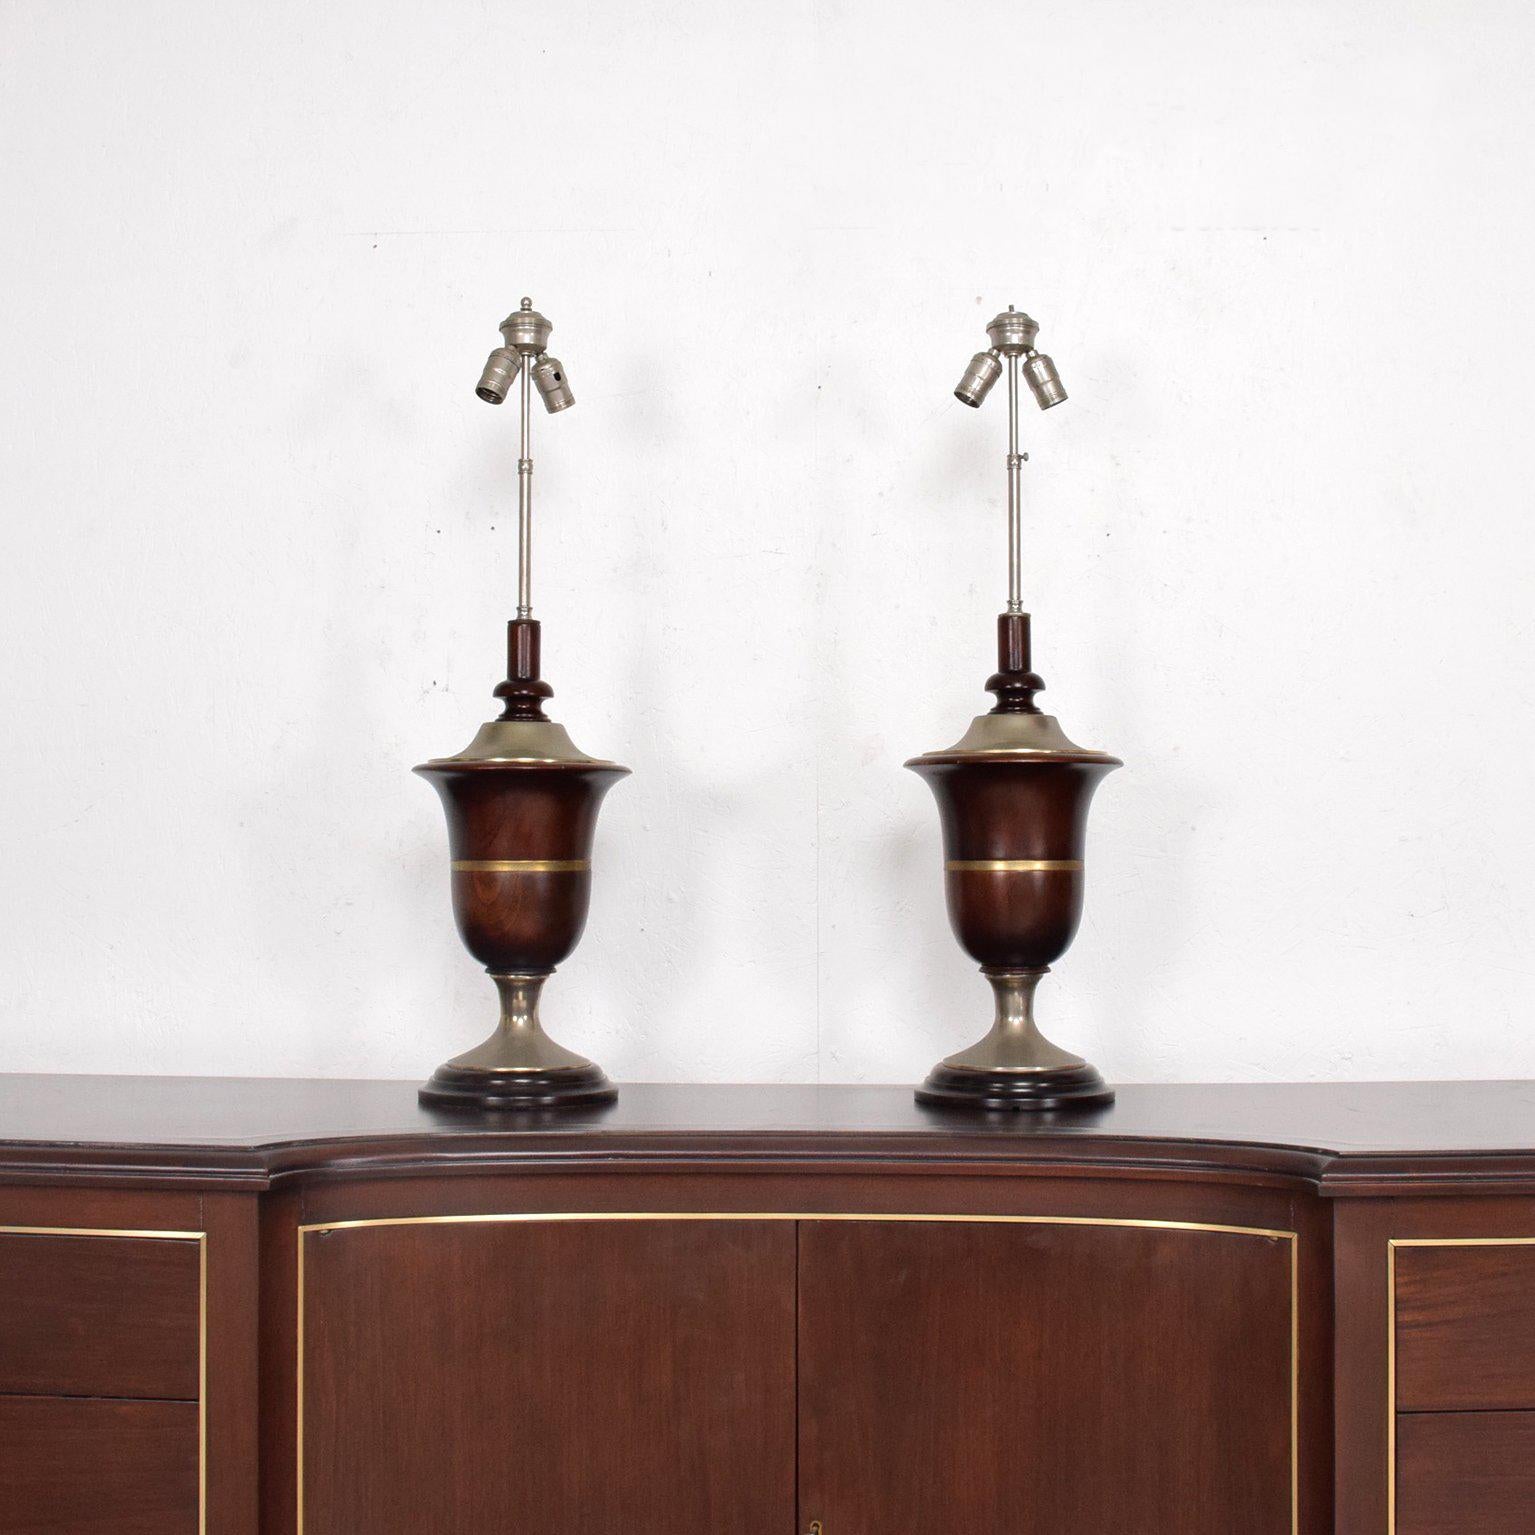 Pair of Neoclassical Table Lamps in Mahogany & Nickel-Plated, Mexican Modernist 6